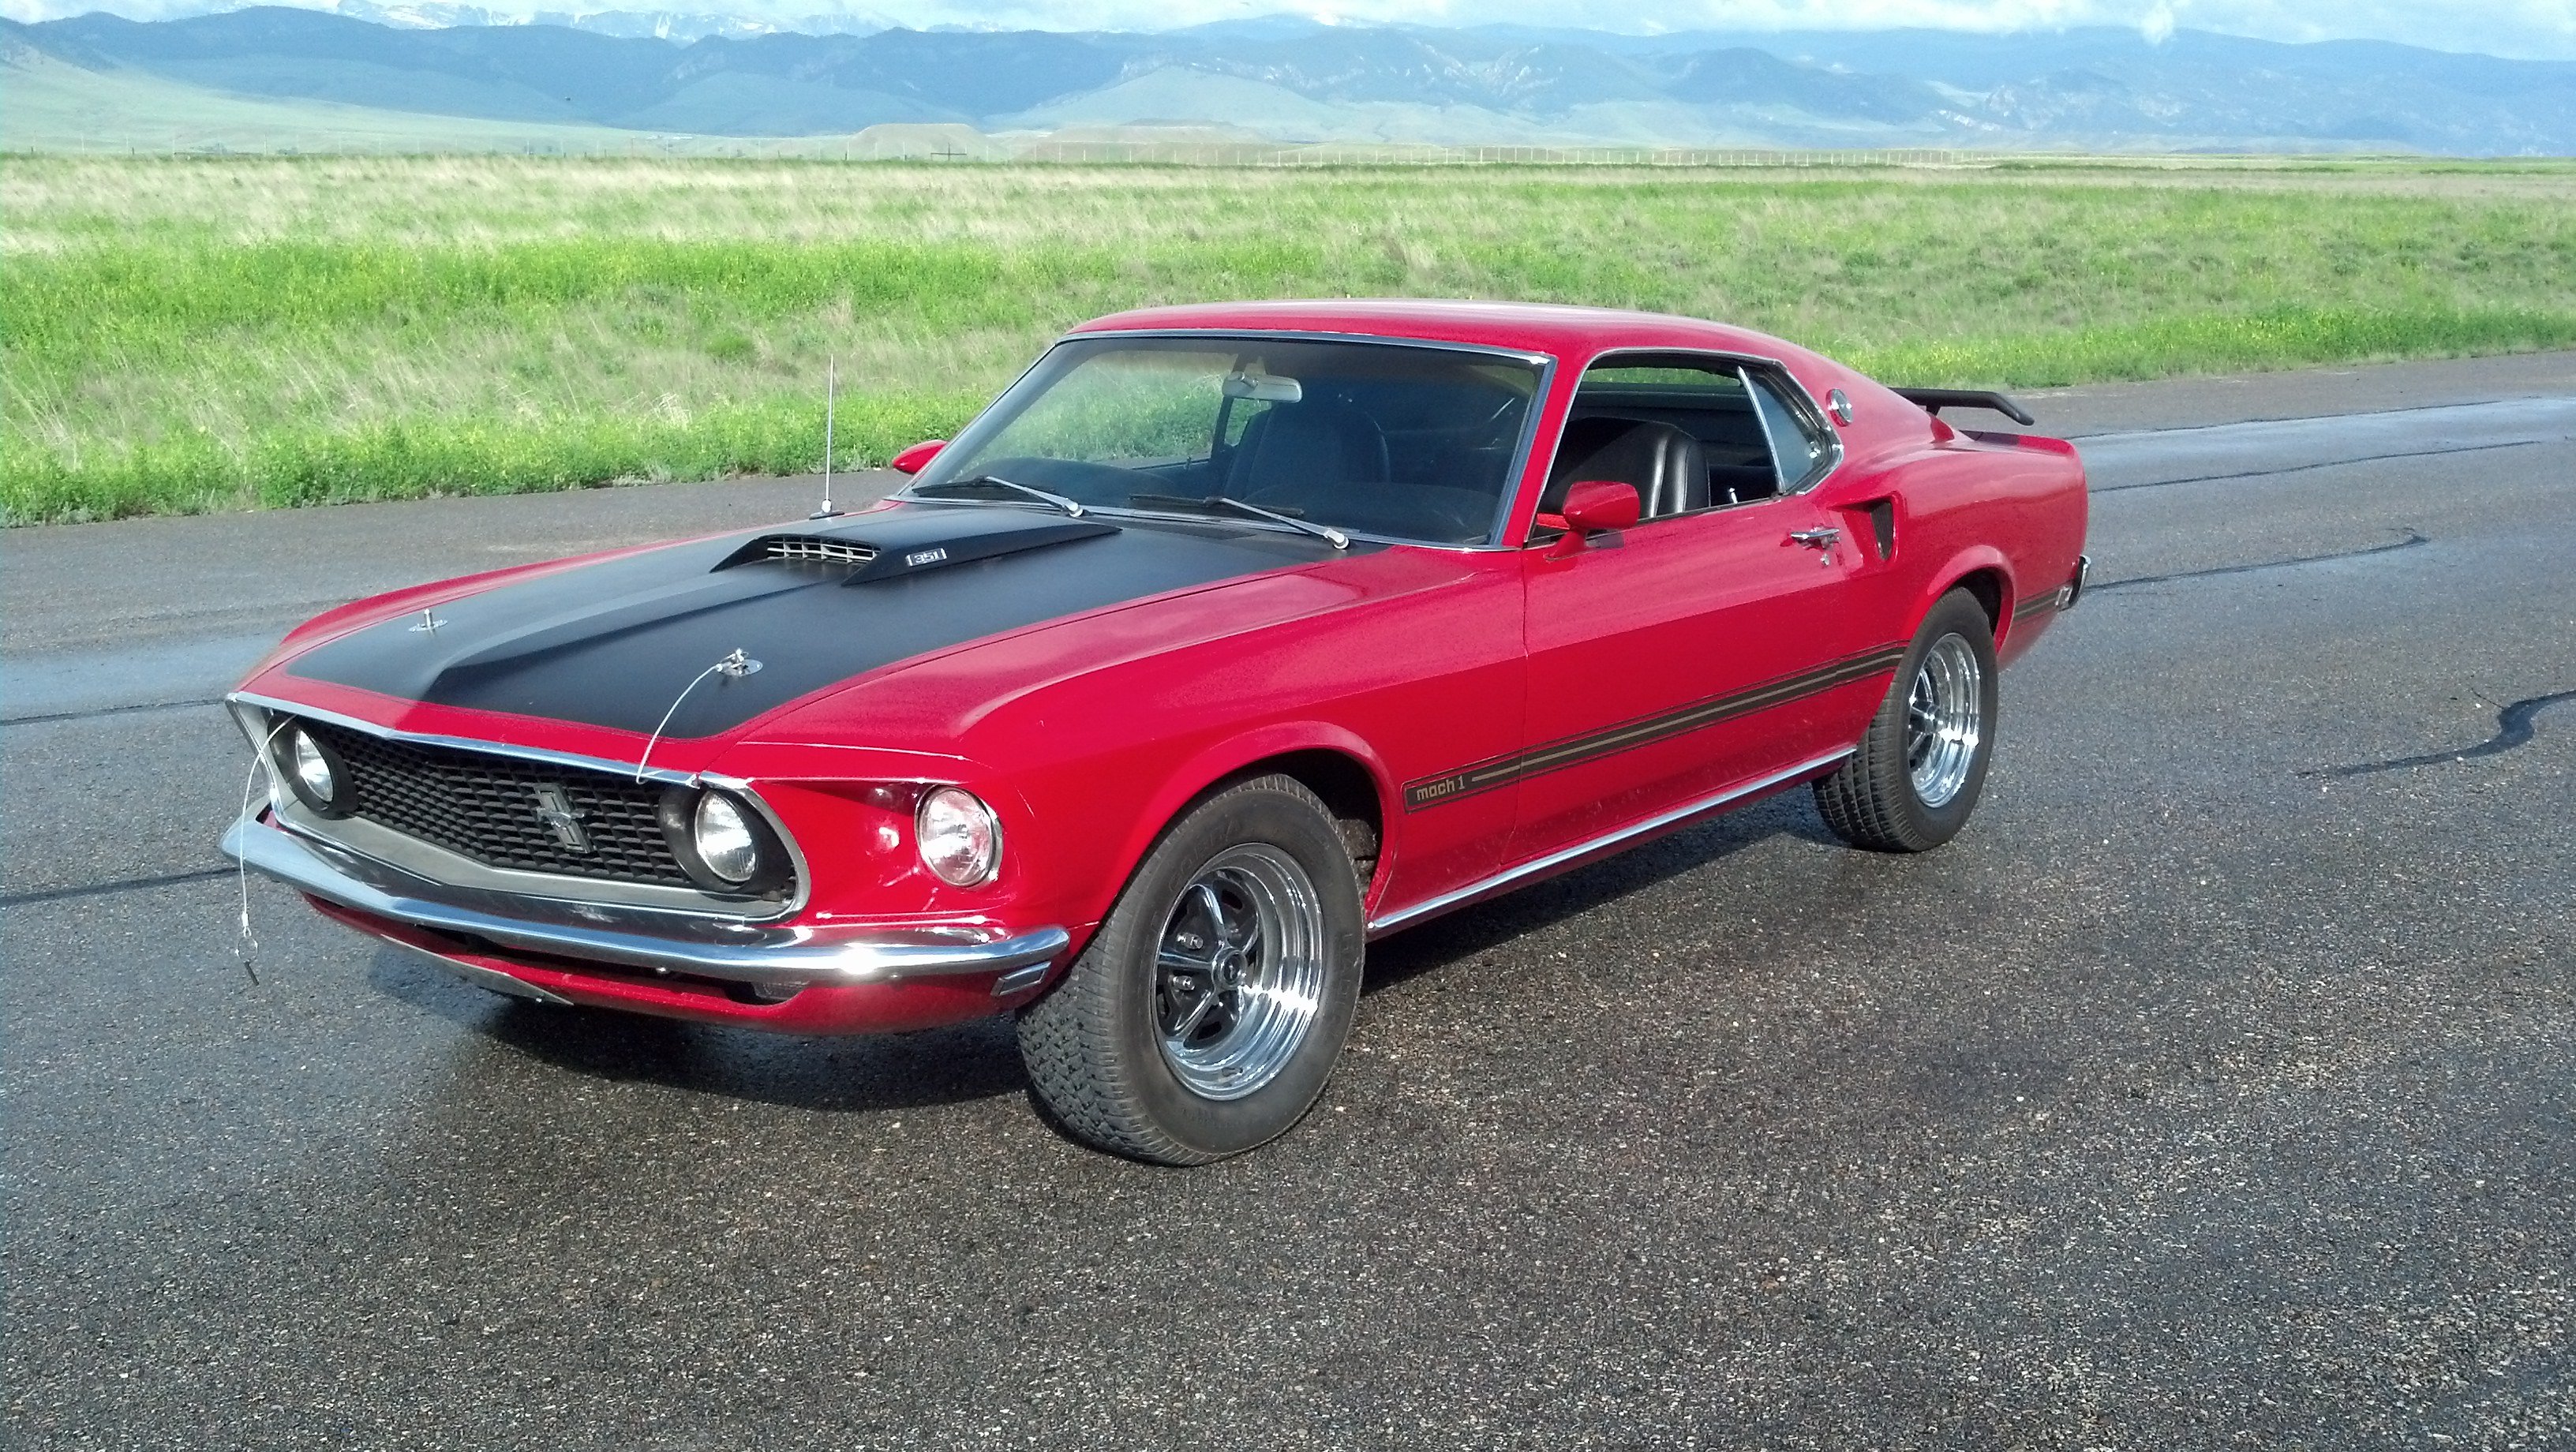 Car Fastback Ford Mustang Mach 1 Muscle Car Red Car 3264x1840